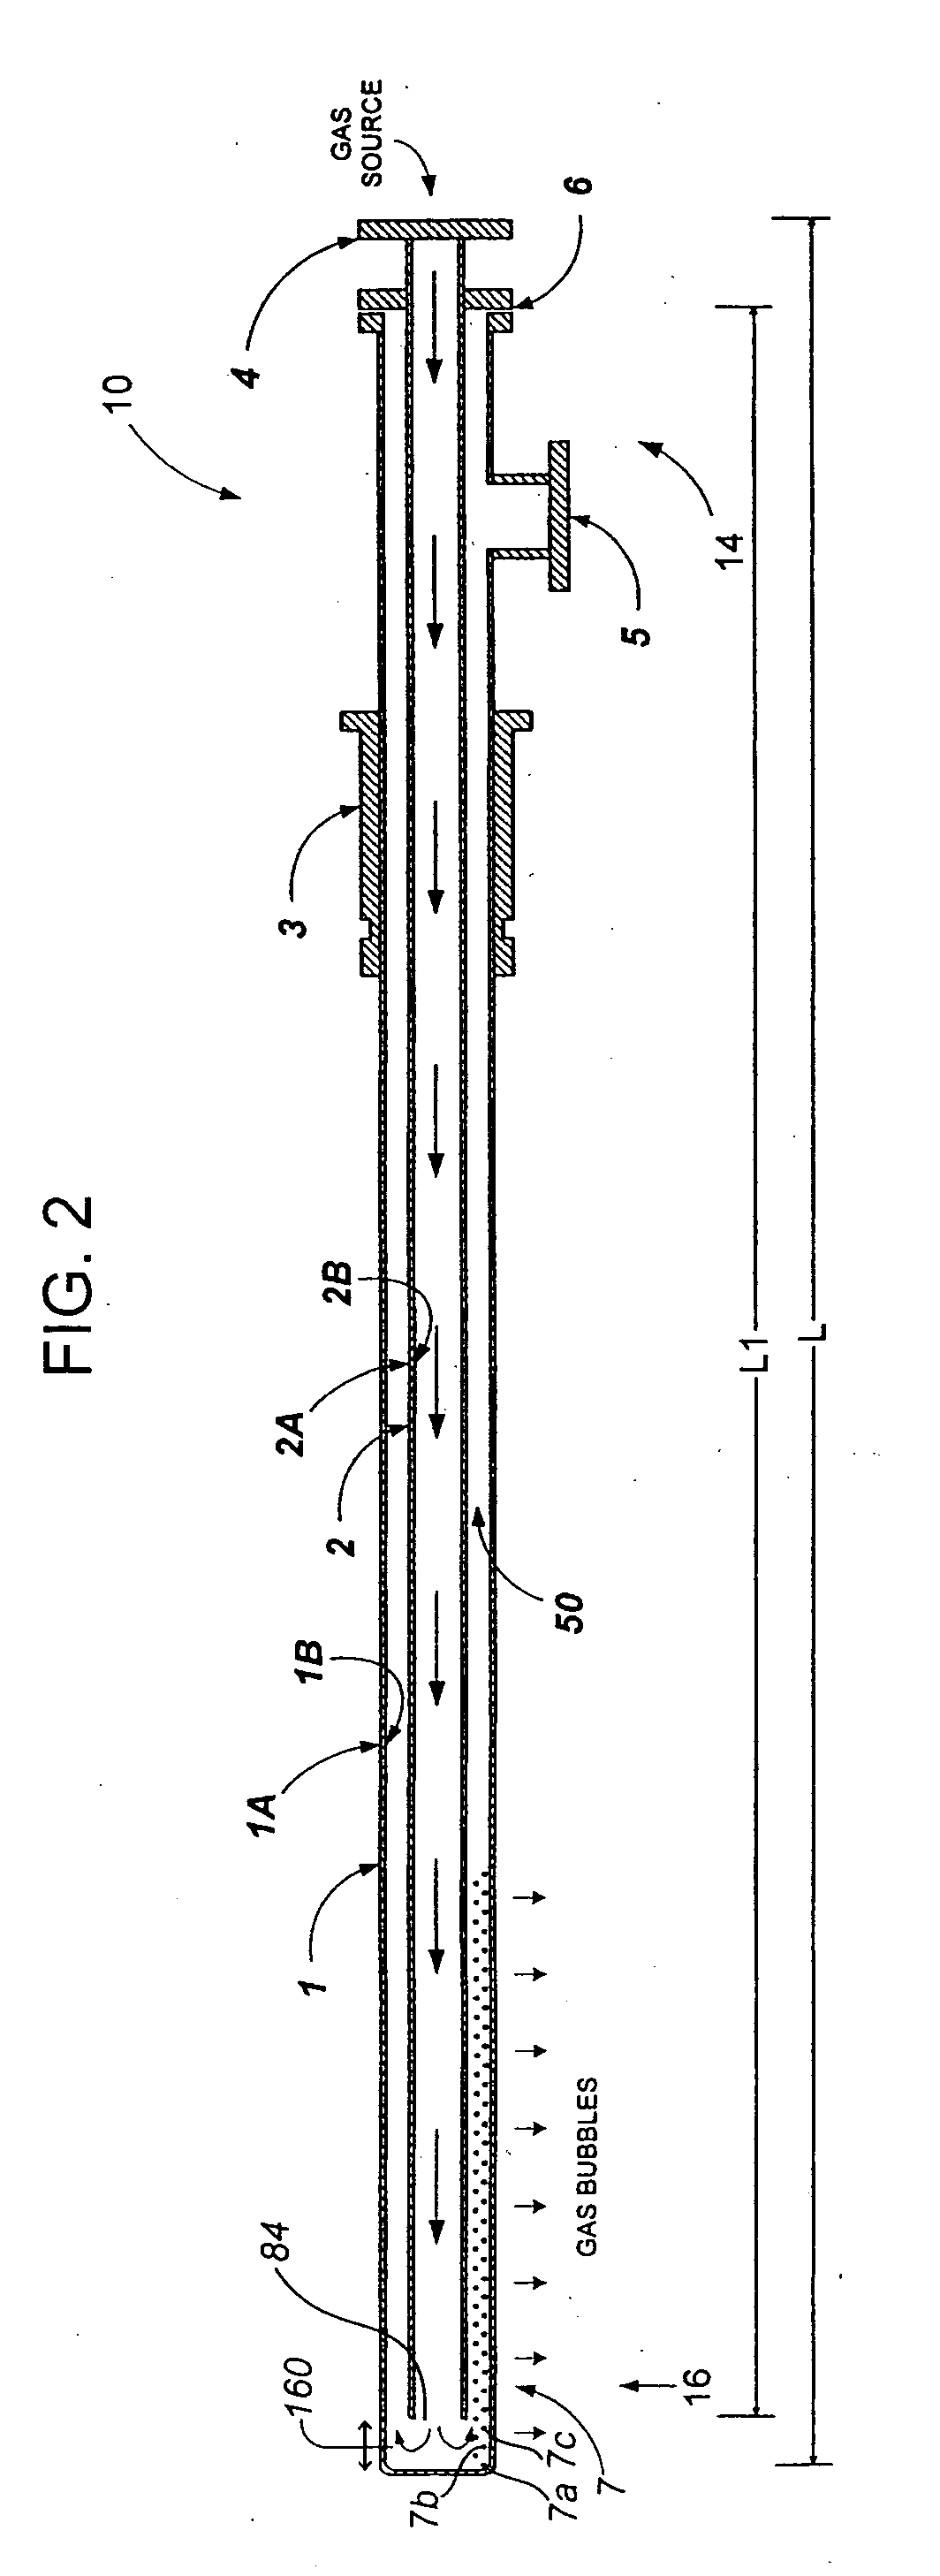 Devices for introducing a gas into a liquid and methods of using the same